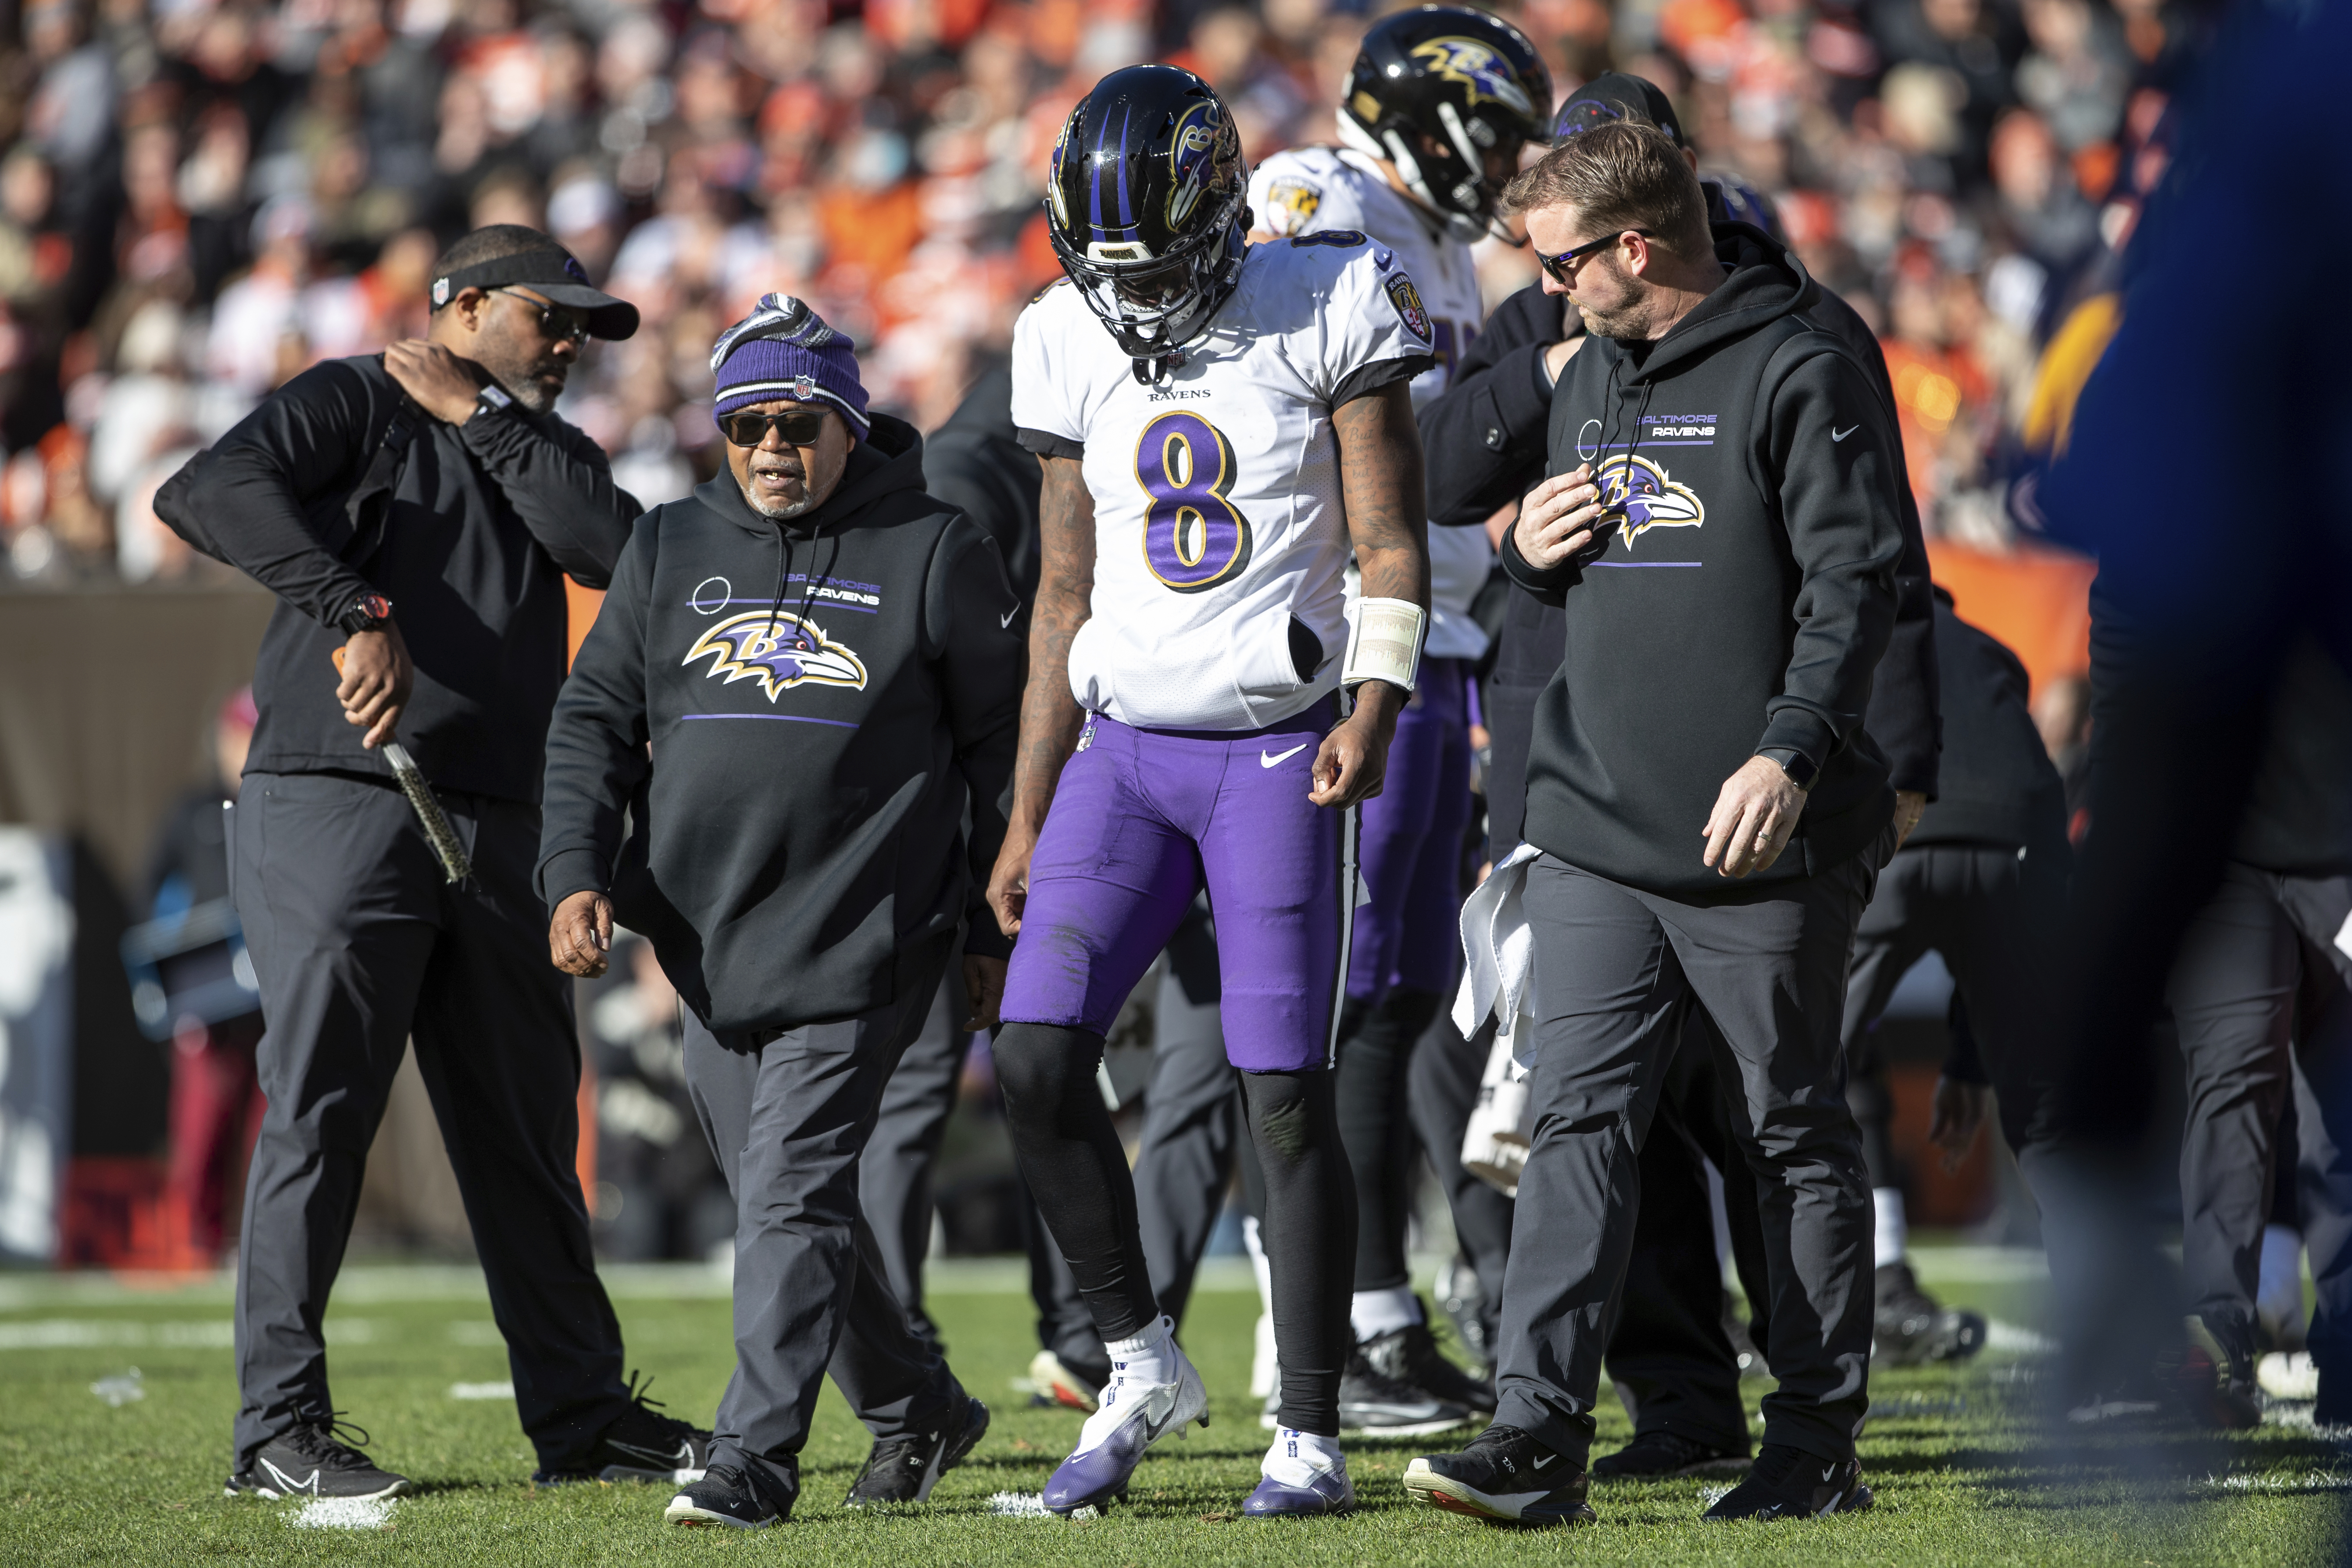 Lamar Jackson in Ravens' Plans vs. Packers After Ankle Injury, but Status TBD